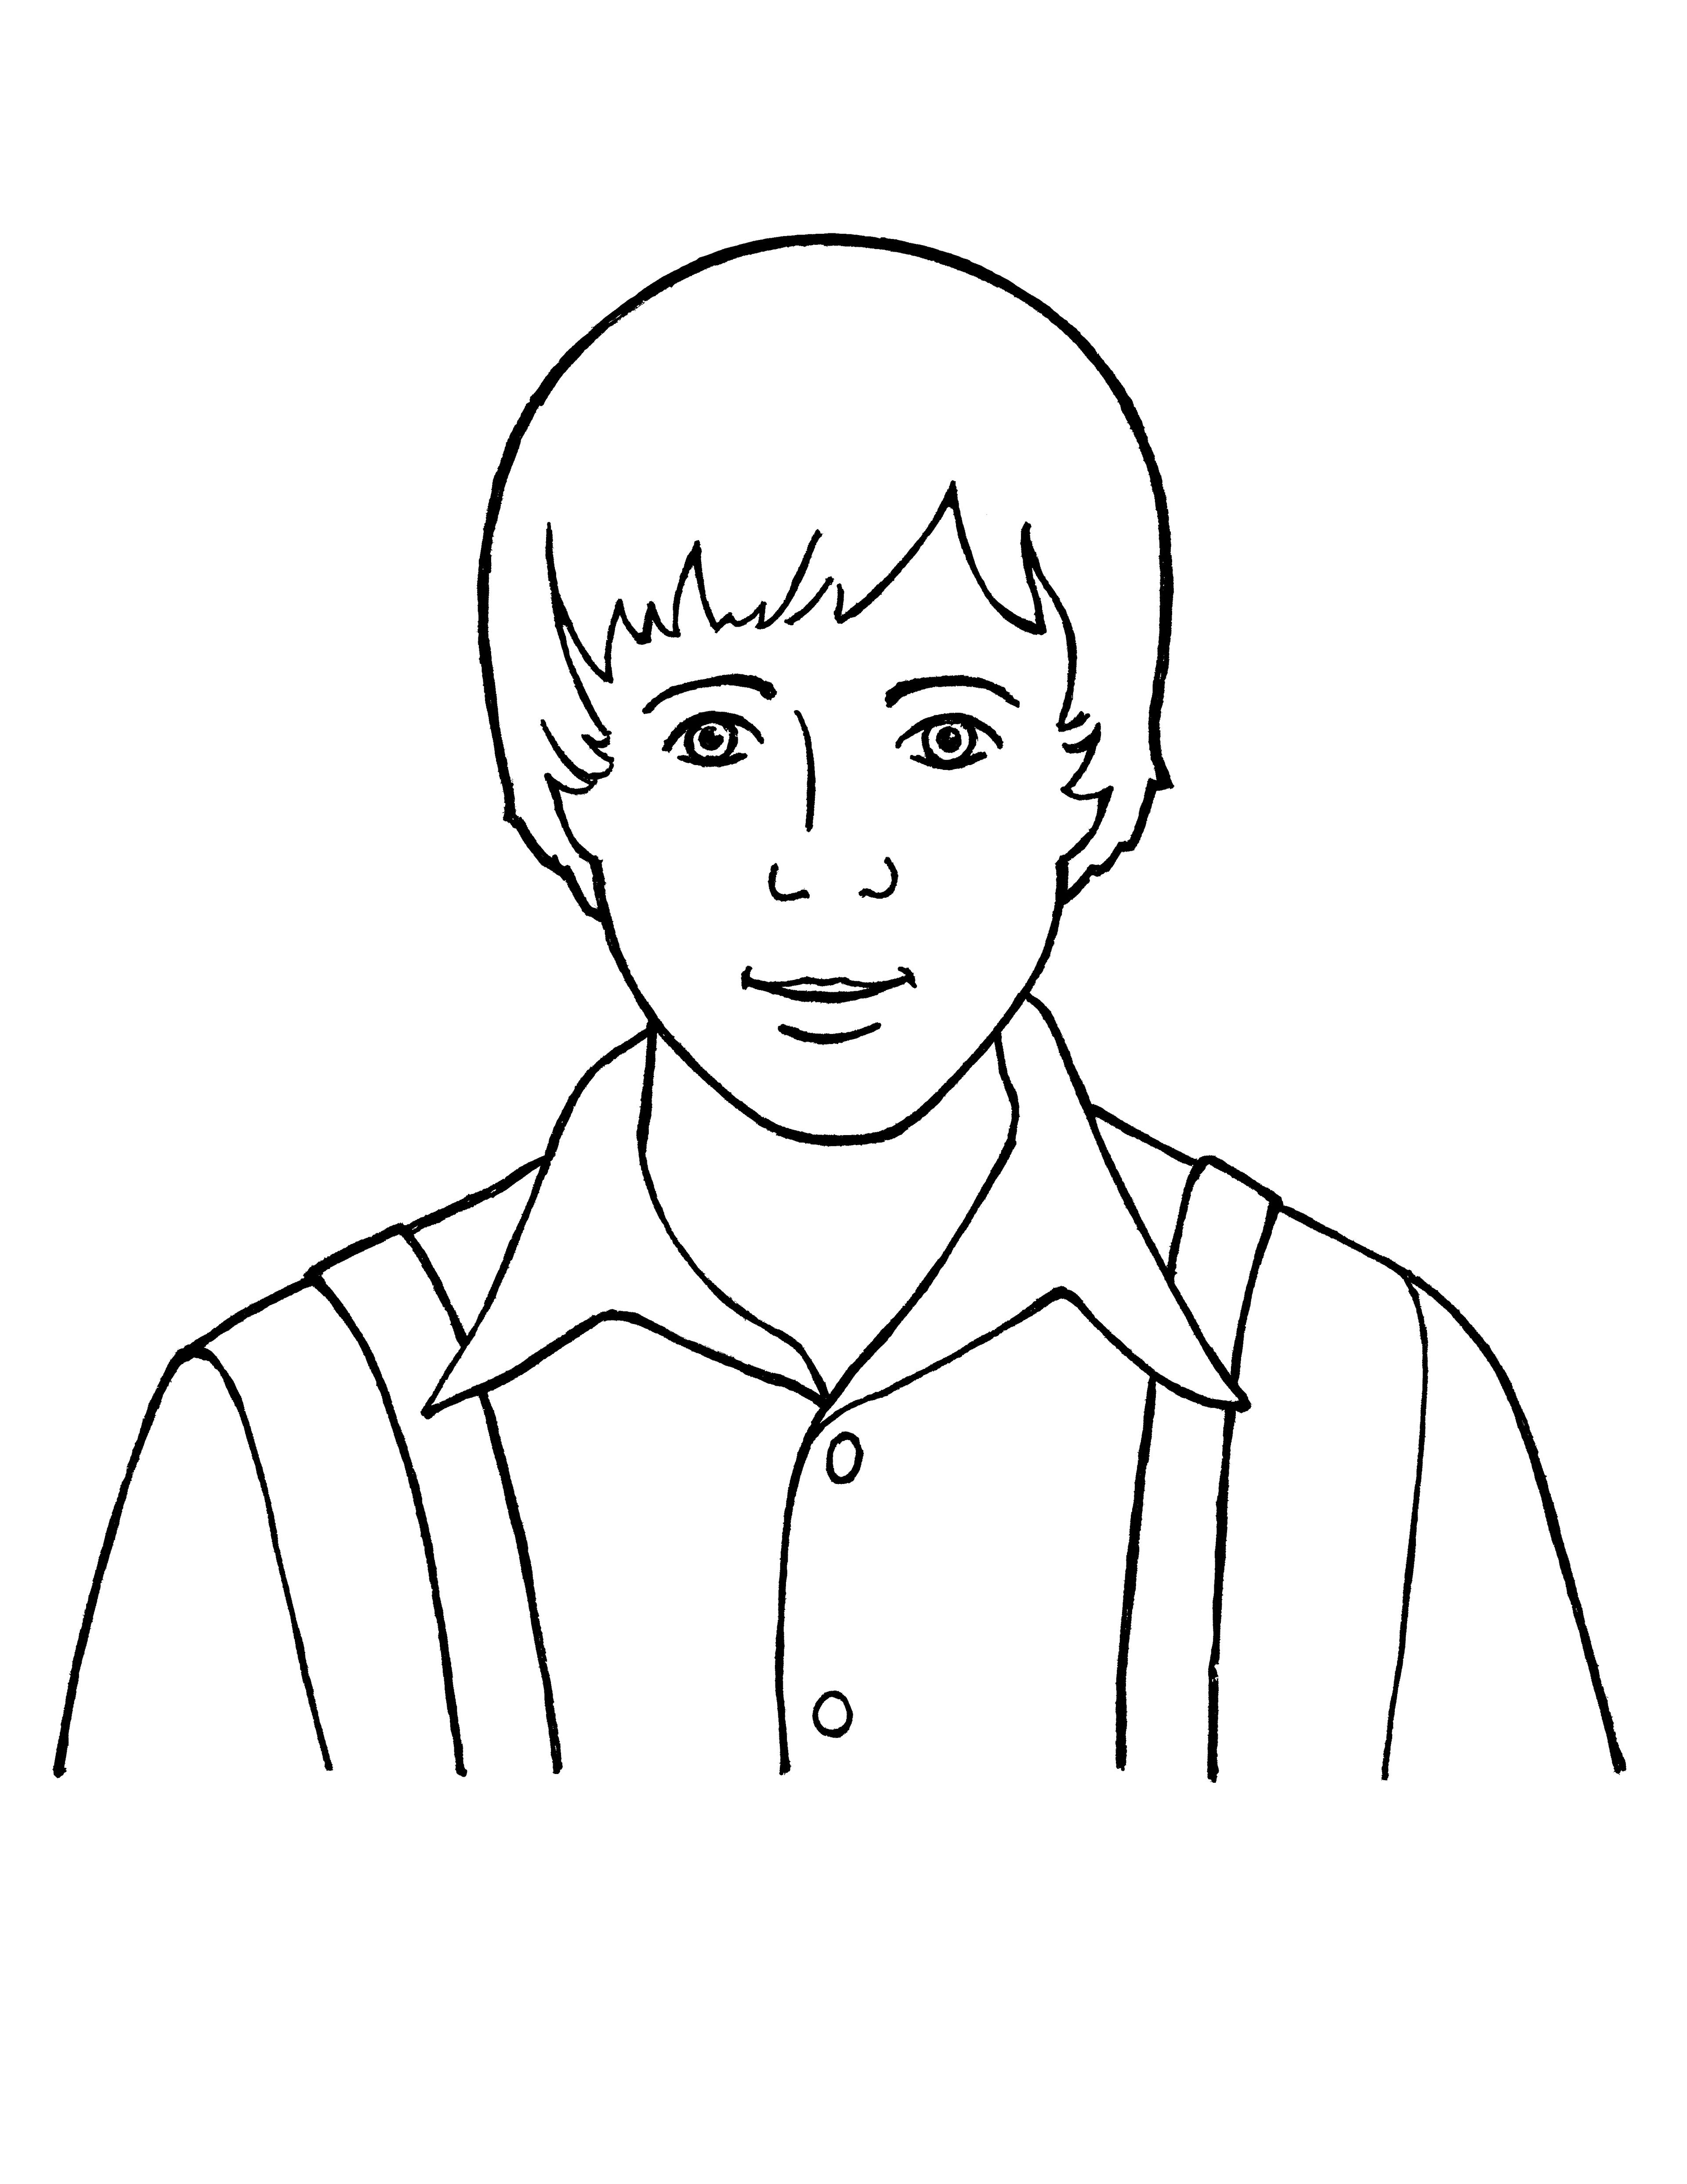 An illustration of Joseph Smith as a young boy, from the nursery manual Behold Your Little Ones (2008), page 91.